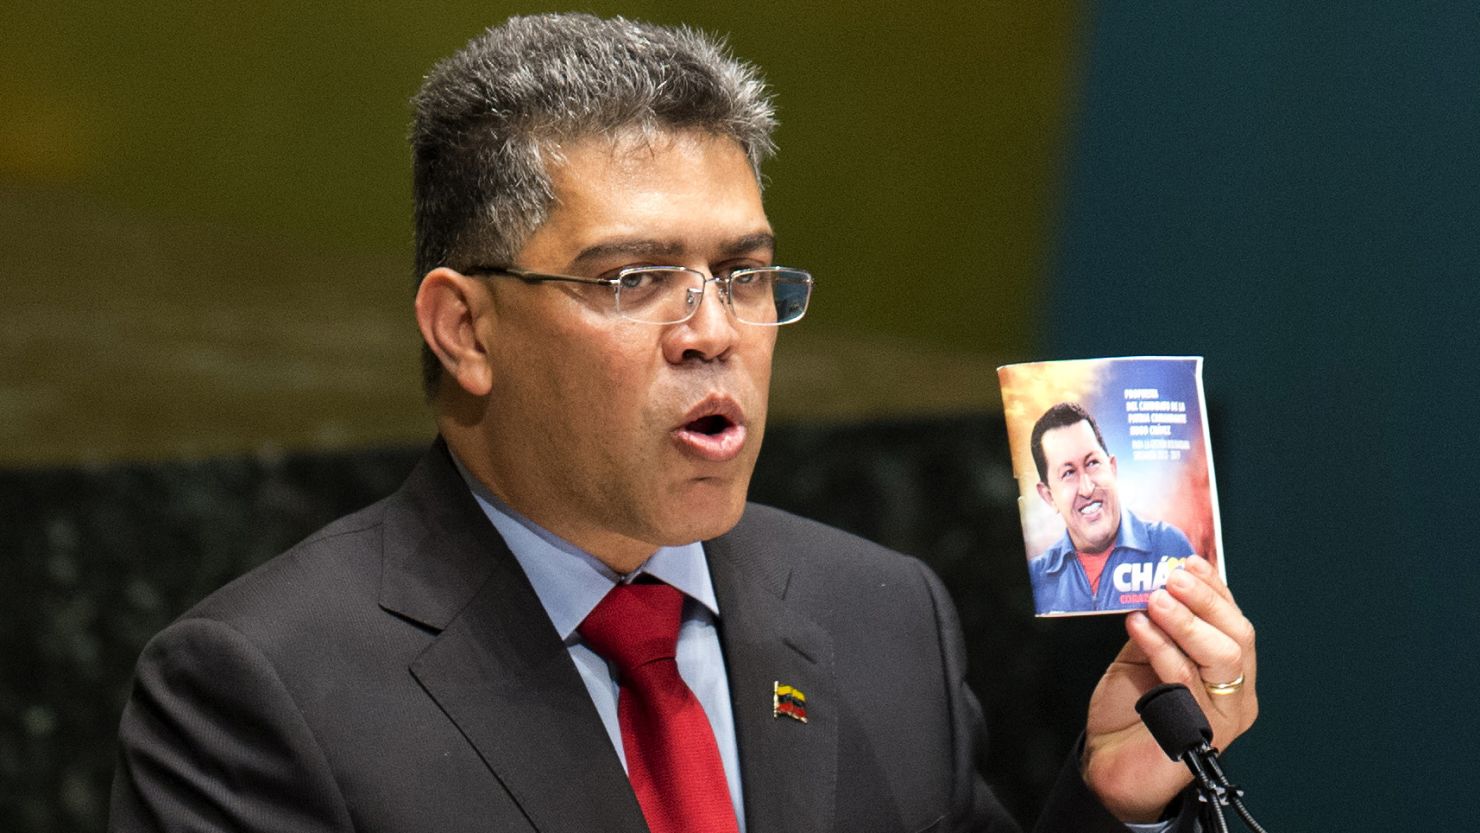 Venezuelan foreign minister Elias Jaua holds a photo of Hugo Chavez during a tribute on March 13 at the U.N. in New York.